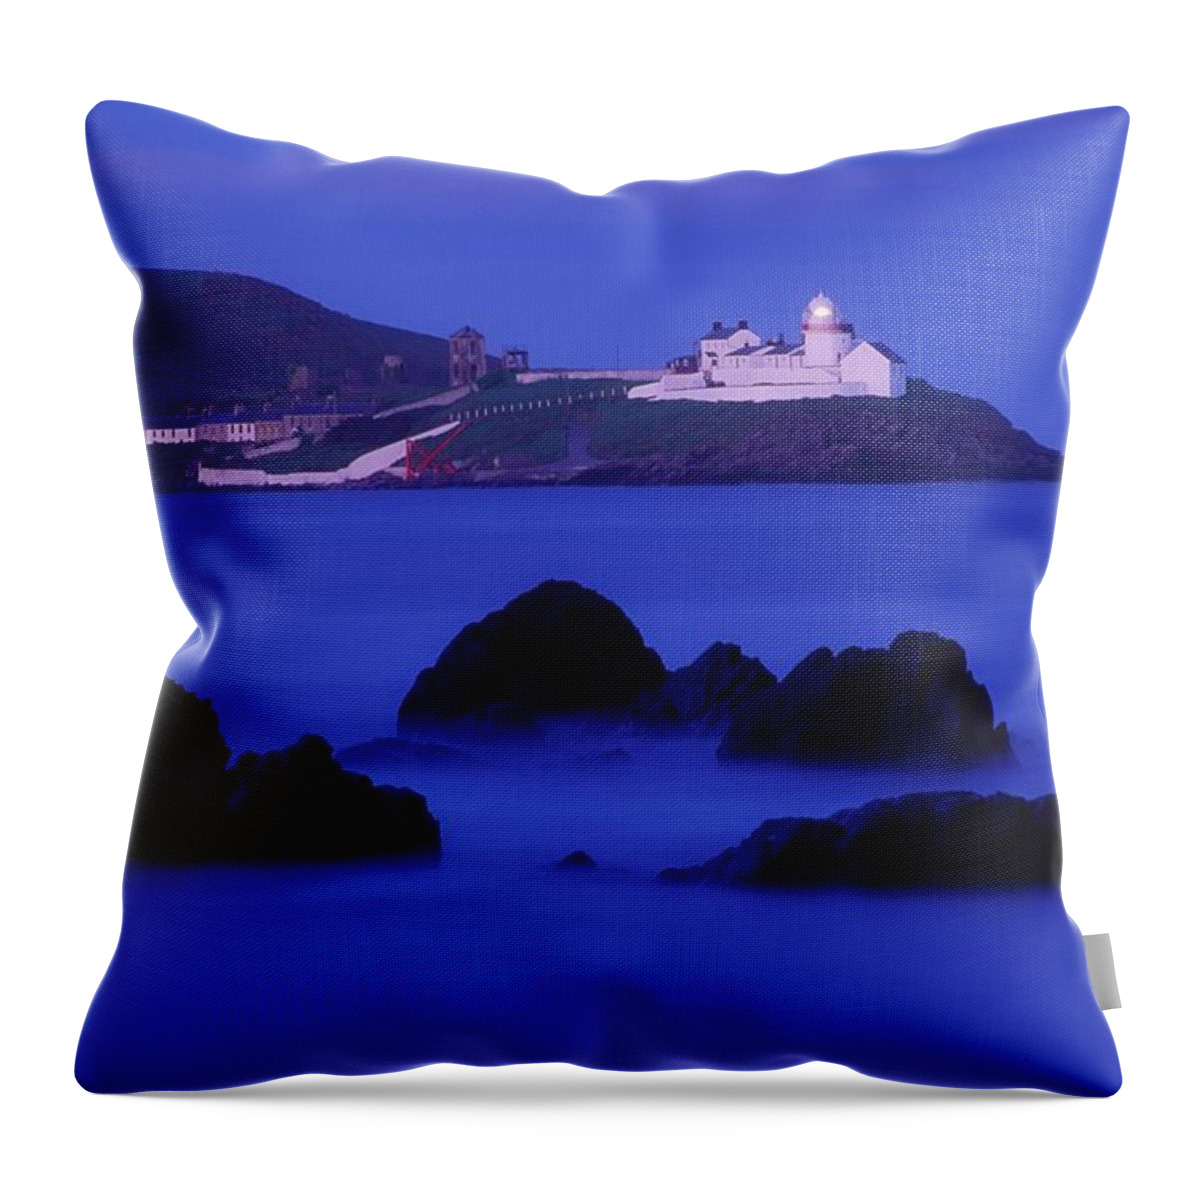 Architecture Throw Pillow featuring the photograph Roches Point, Whitegate, County Cork by Richard Cummins